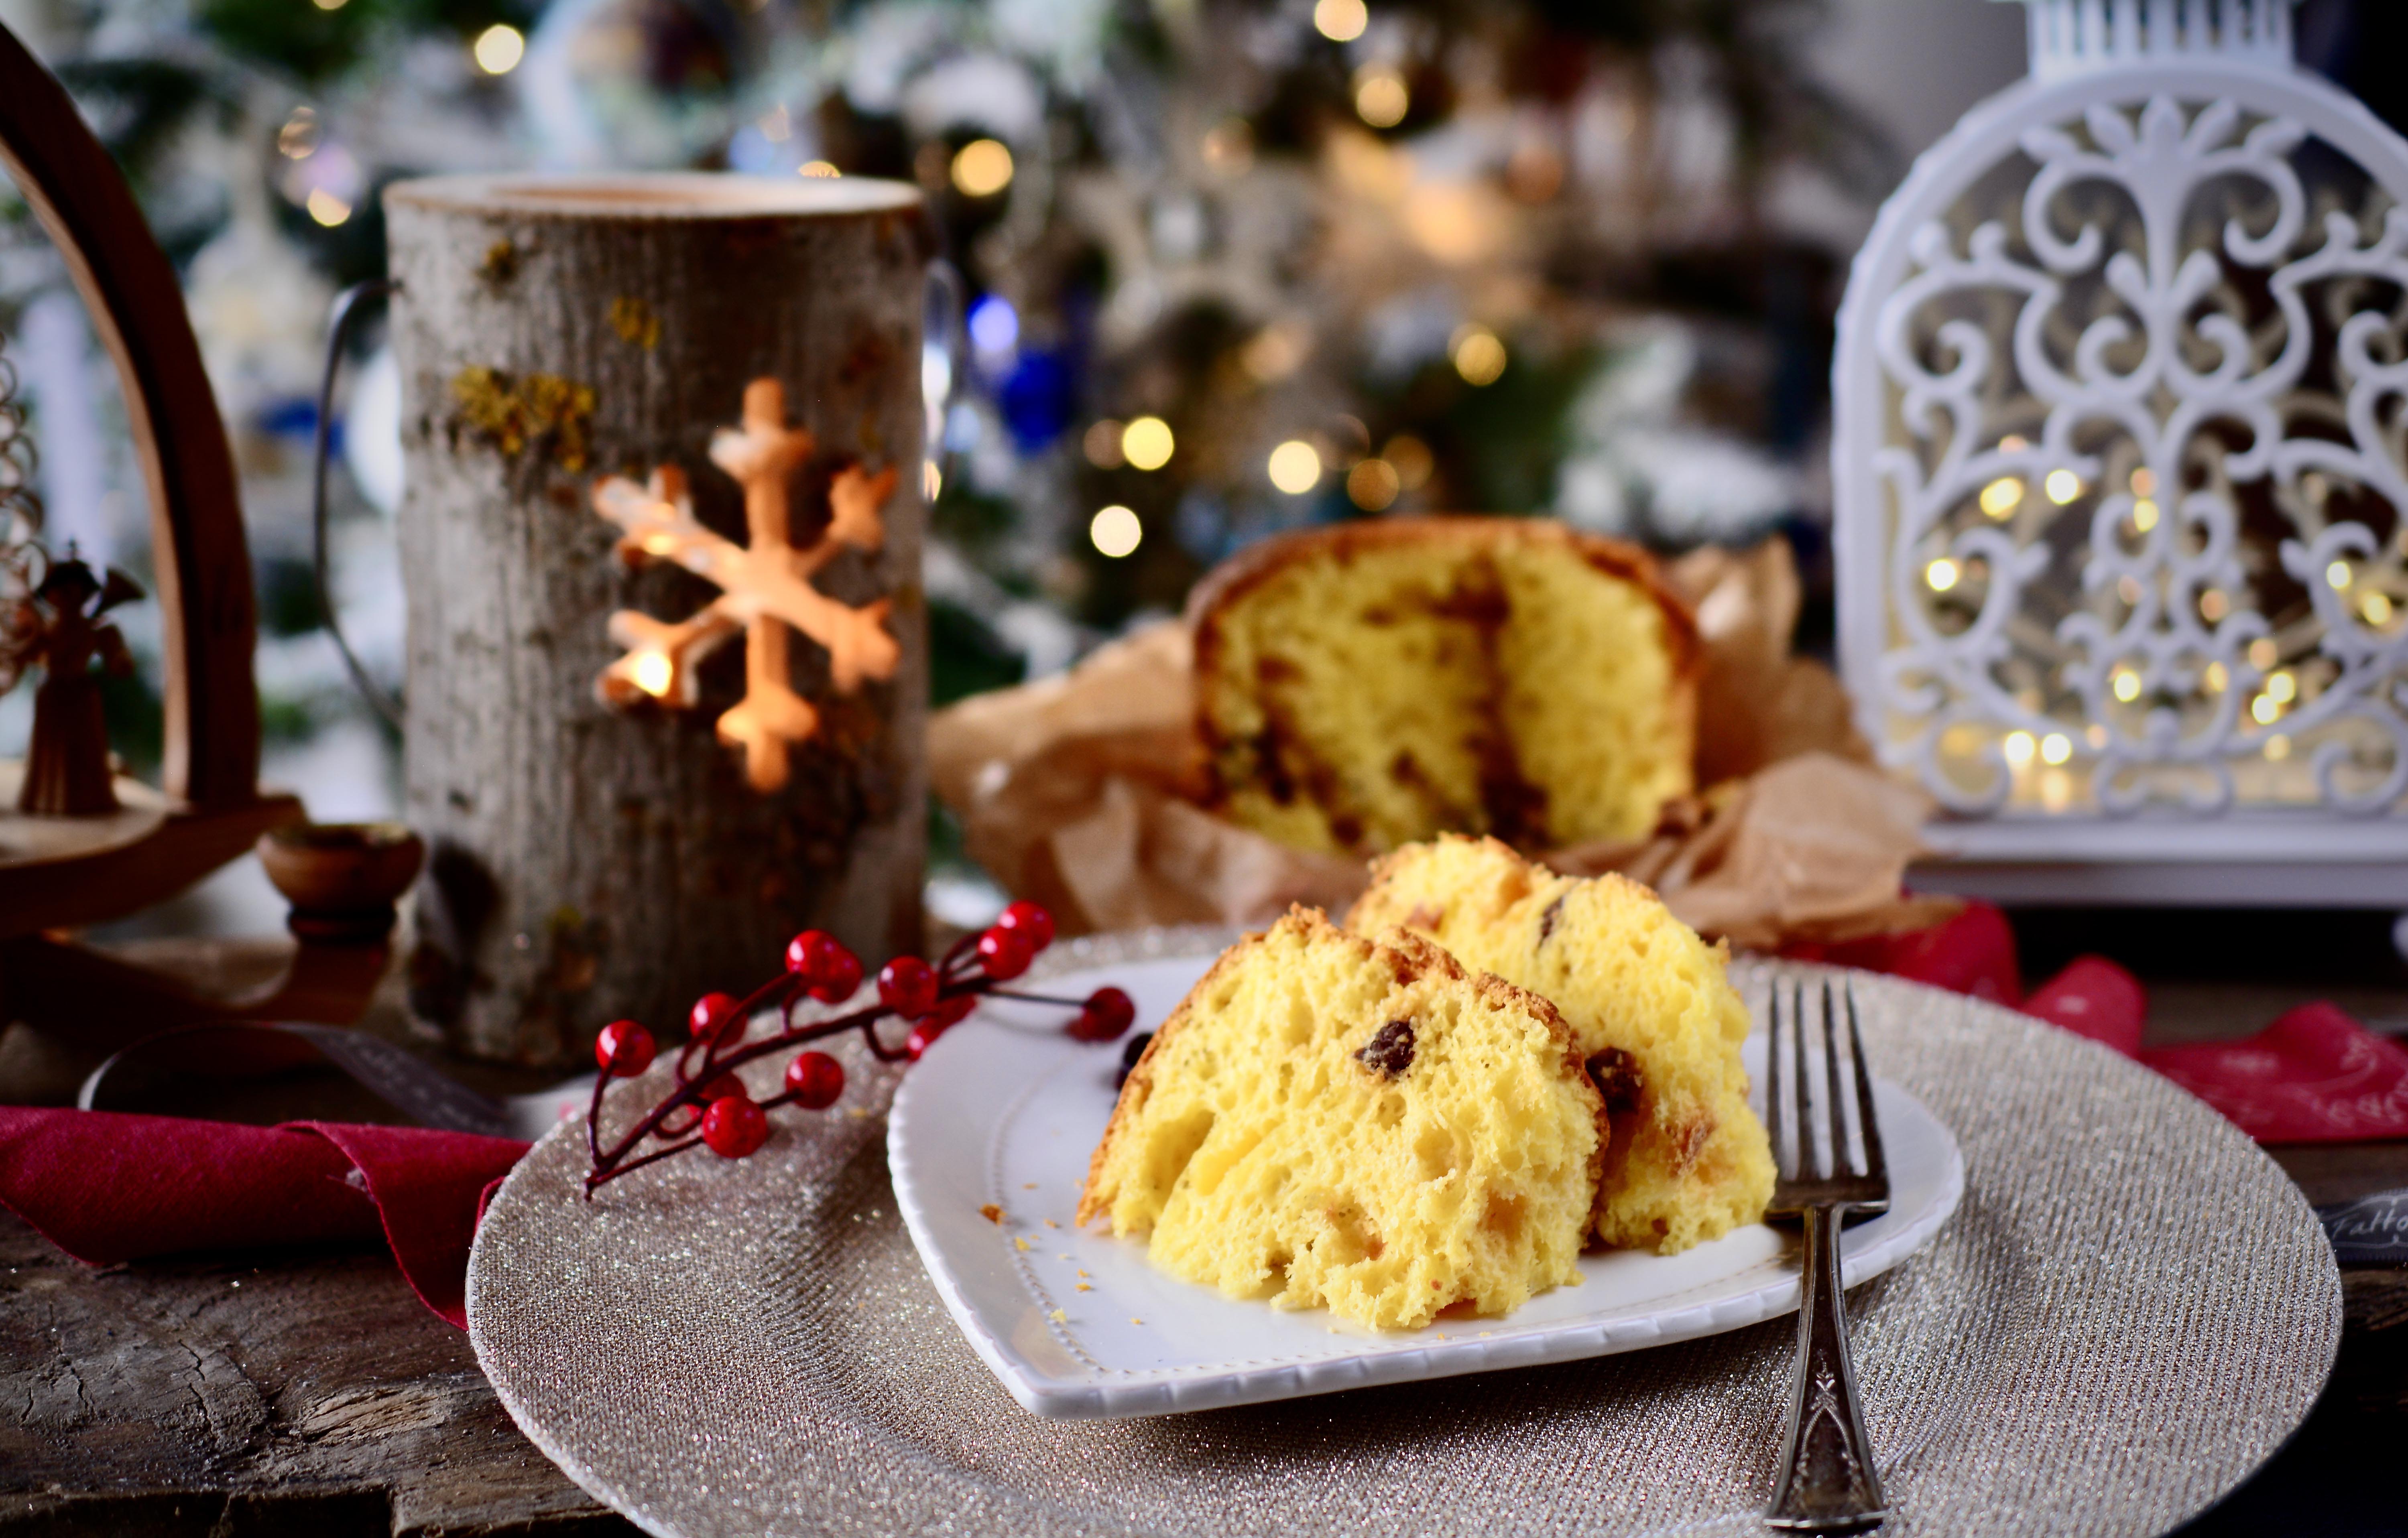 Recipe of Christmas panettone flavored with Garda extra virgin olive oil